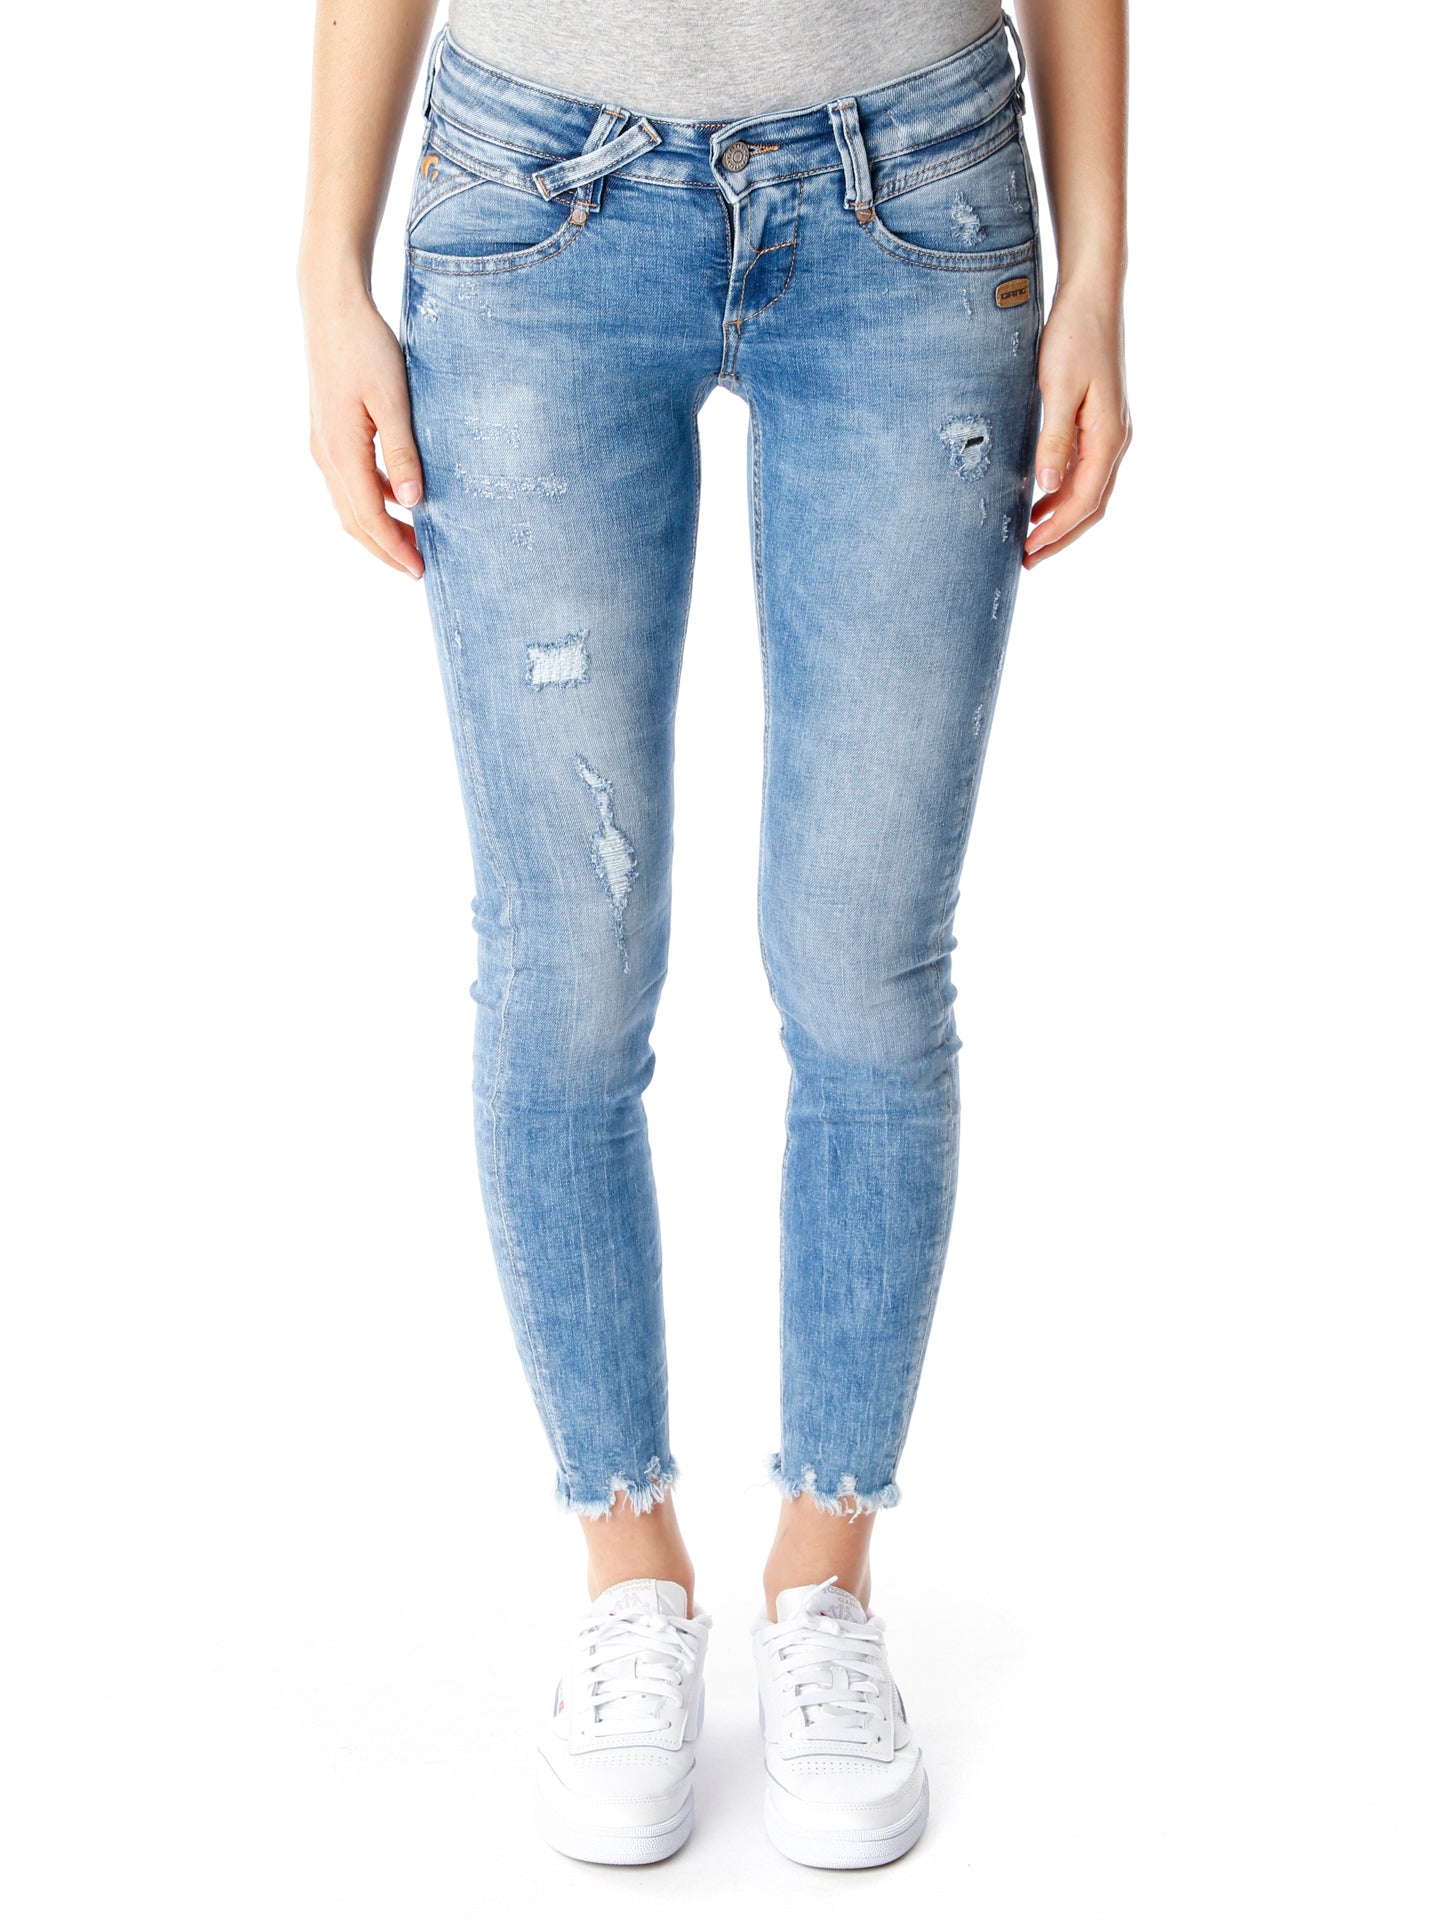 Gang Nena Cropped Skinny Fit Low Waist Jeans